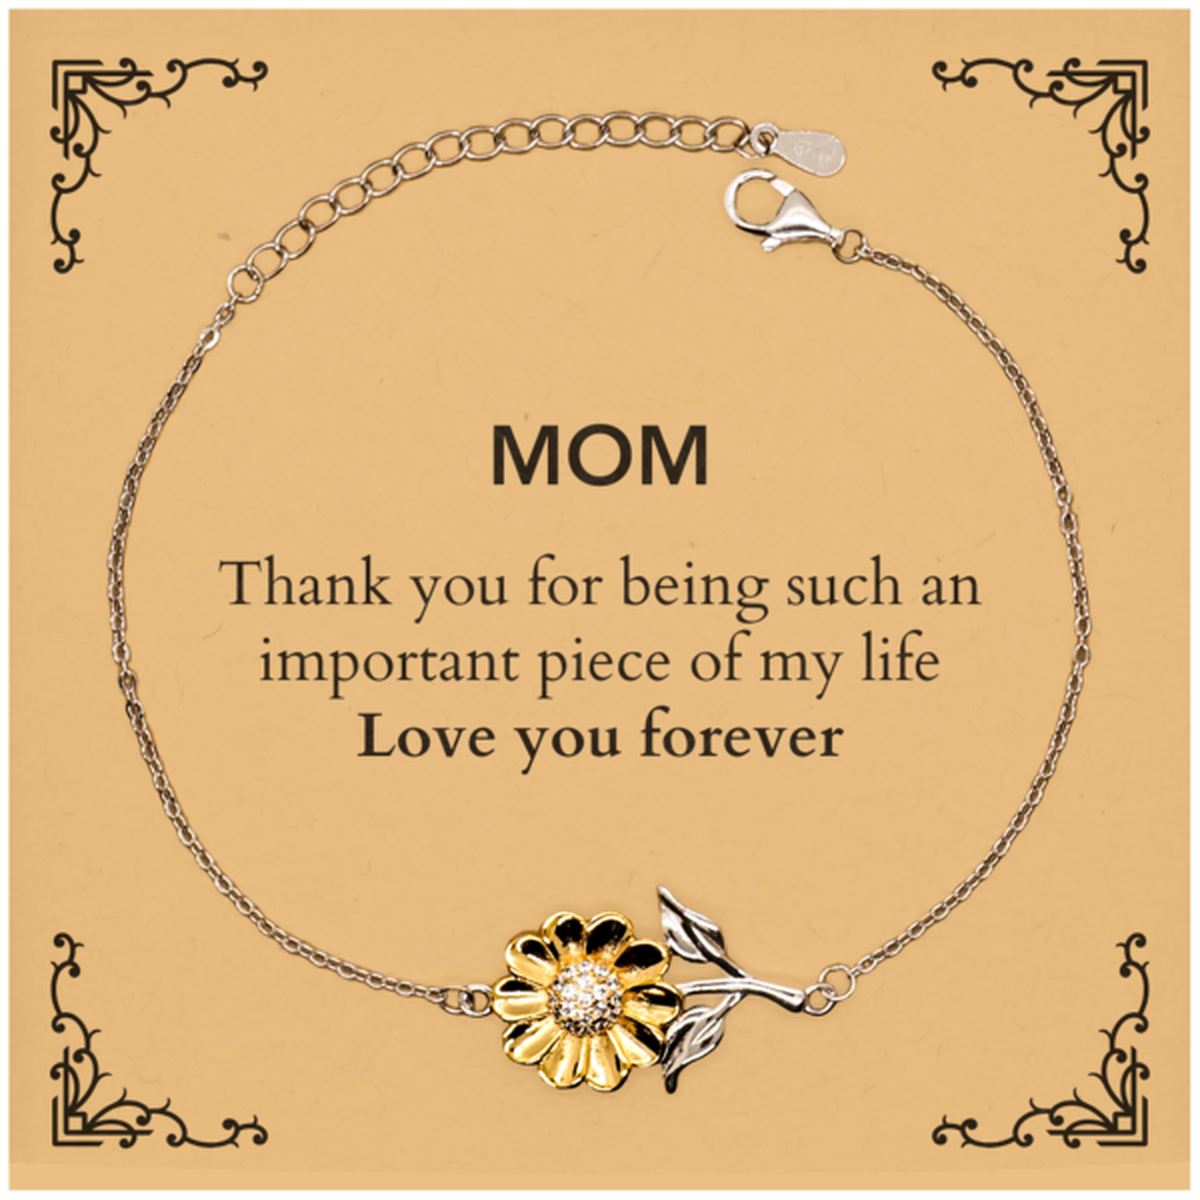 Appropriate Mom Sunflower Bracelet Epic Birthday Gifts for Mom Thank you for being such an important piece of my life Mom Christmas Mothers Fathers Day